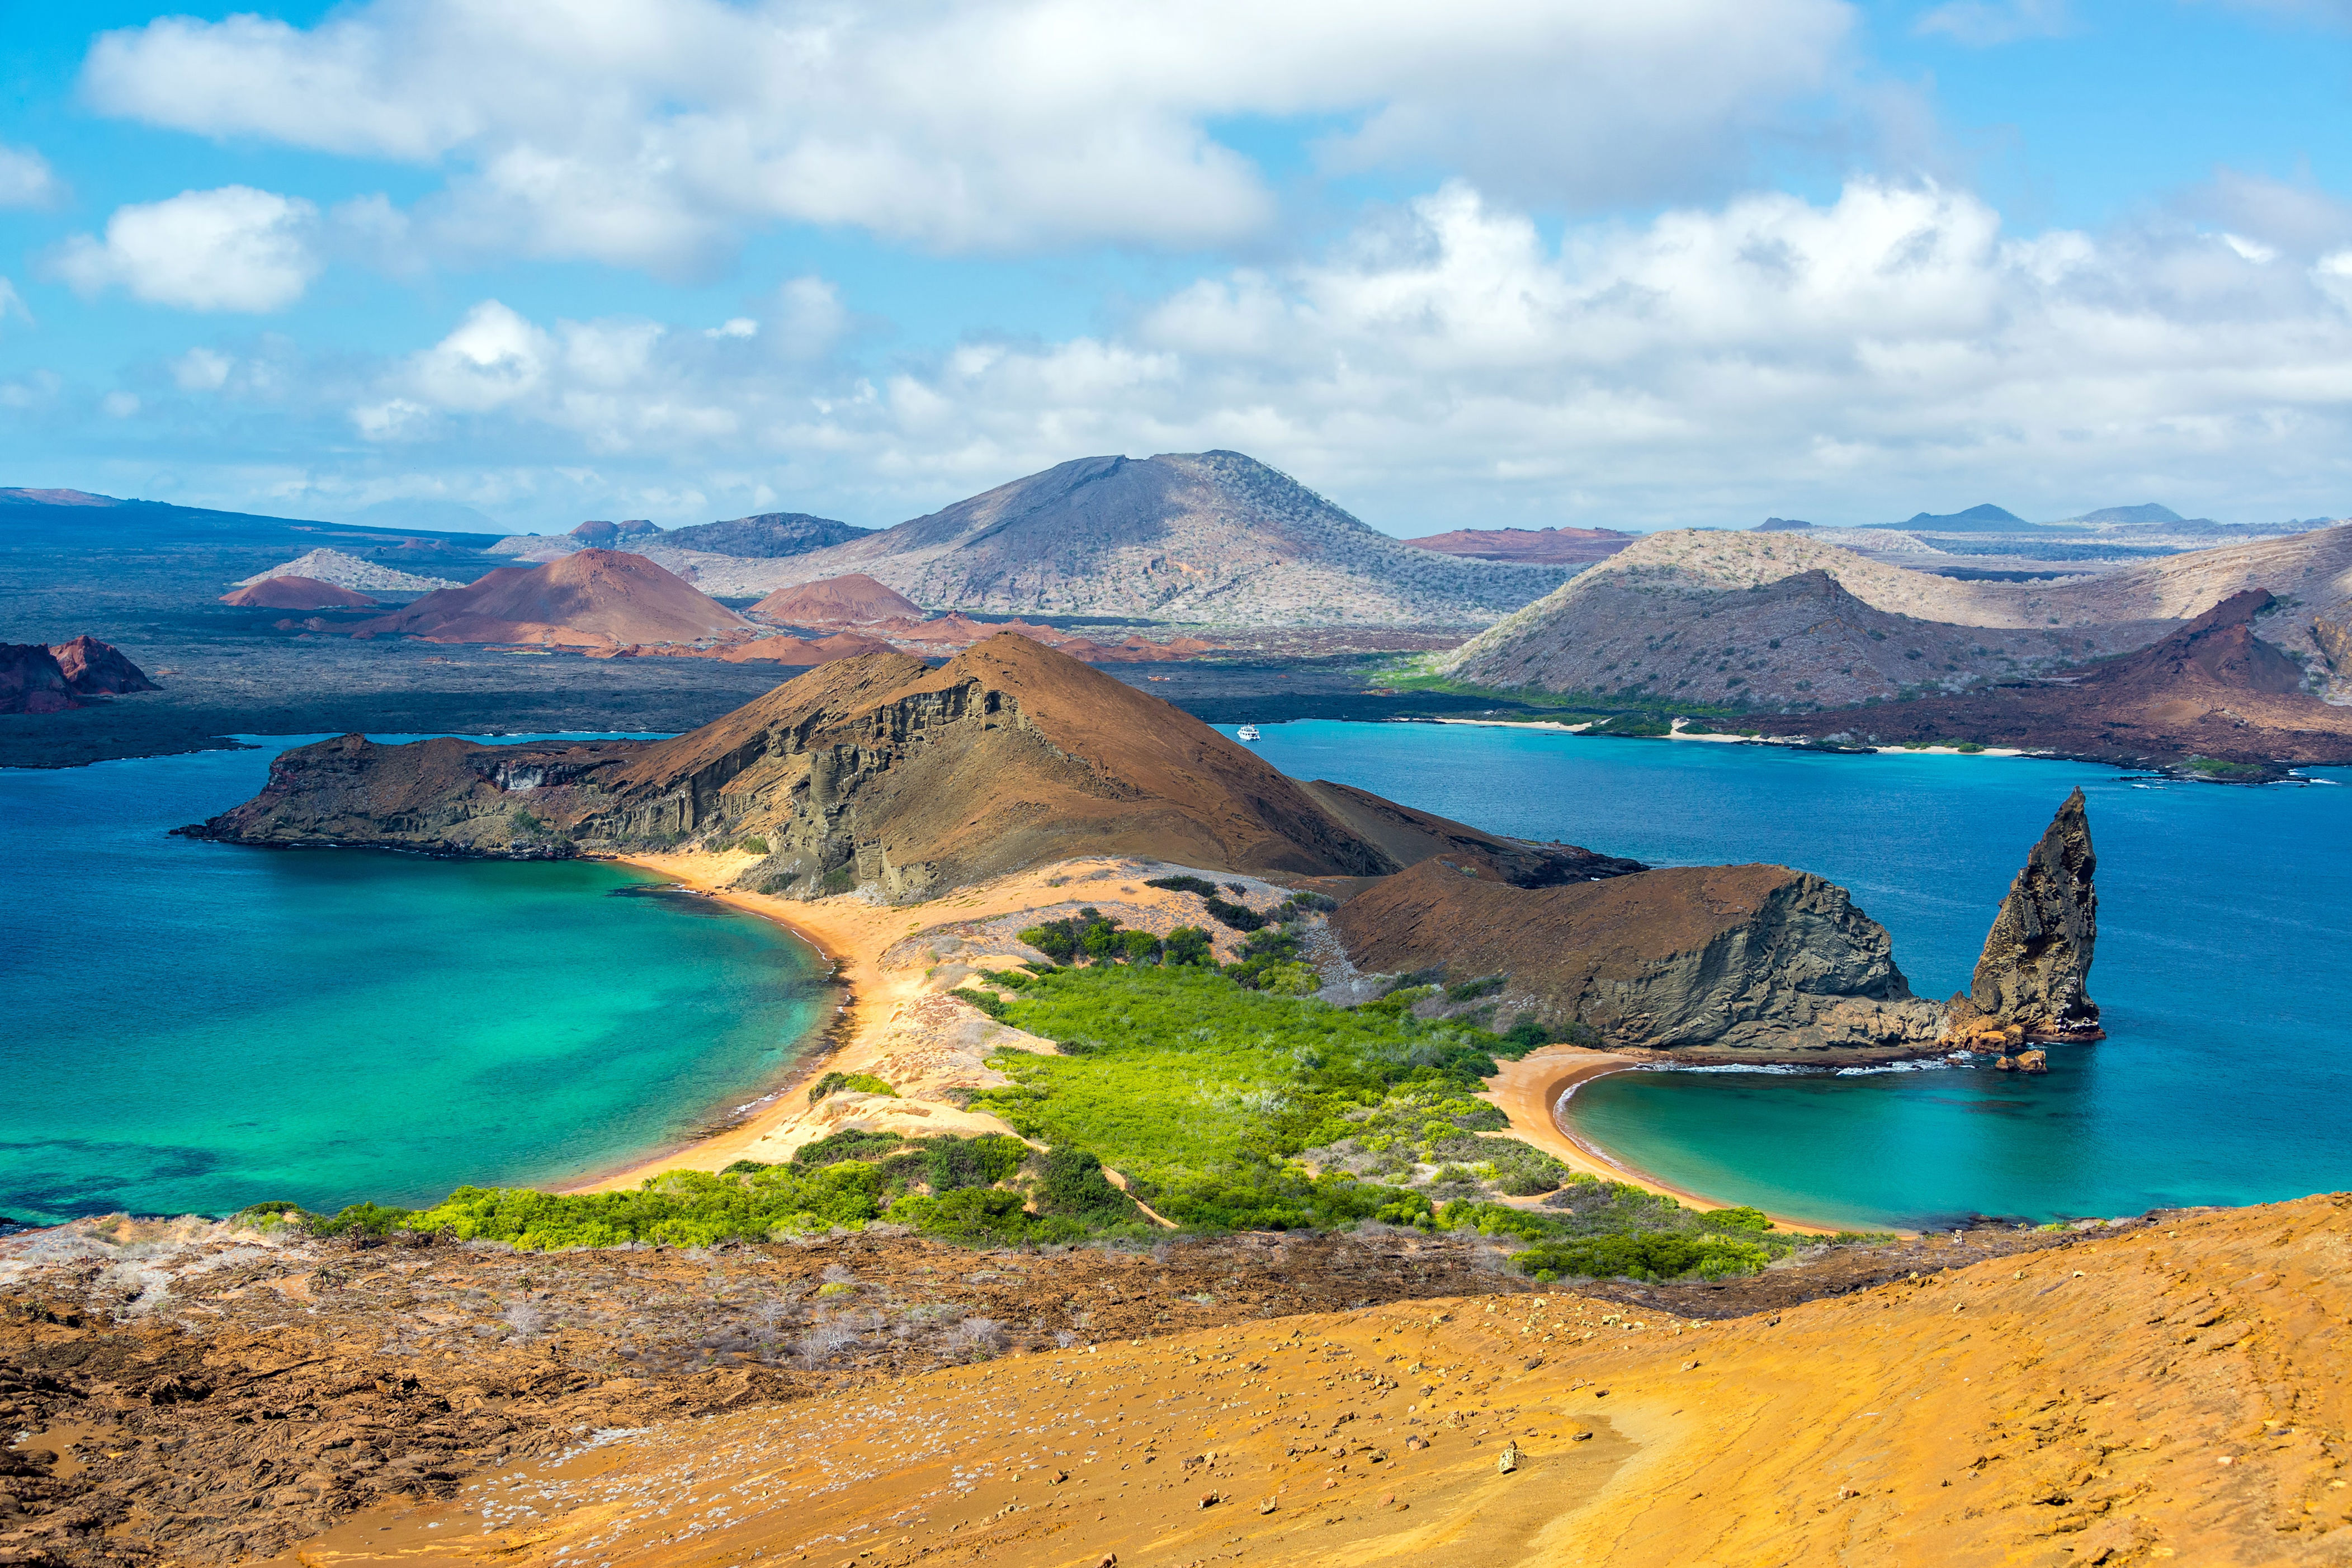 <p>Do we really have to explain the allure of the <a href="https://www.cntraveler.com/story/visiting-the-galapagos-is-about-to-get-a-lot-more-expensive?mbid=synd_msn_rss&utm_source=msn&utm_medium=syndication">Galápagos</a>? If you can, make your next travel goal to visit this of-another-time stretch of Ecuador, with dinosaur-like giant tortoises lumbering through the tall grass and real-life blue-footed boobies.</p> <p><strong>Date of Inscription:</strong> 1978</p><p>Sign up to receive the latest news, expert tips, and inspiration on all things travel</p><a href="https://www.cntraveler.com/newsletter/the-daily?sourceCode=msnsend">Inspire Me</a>